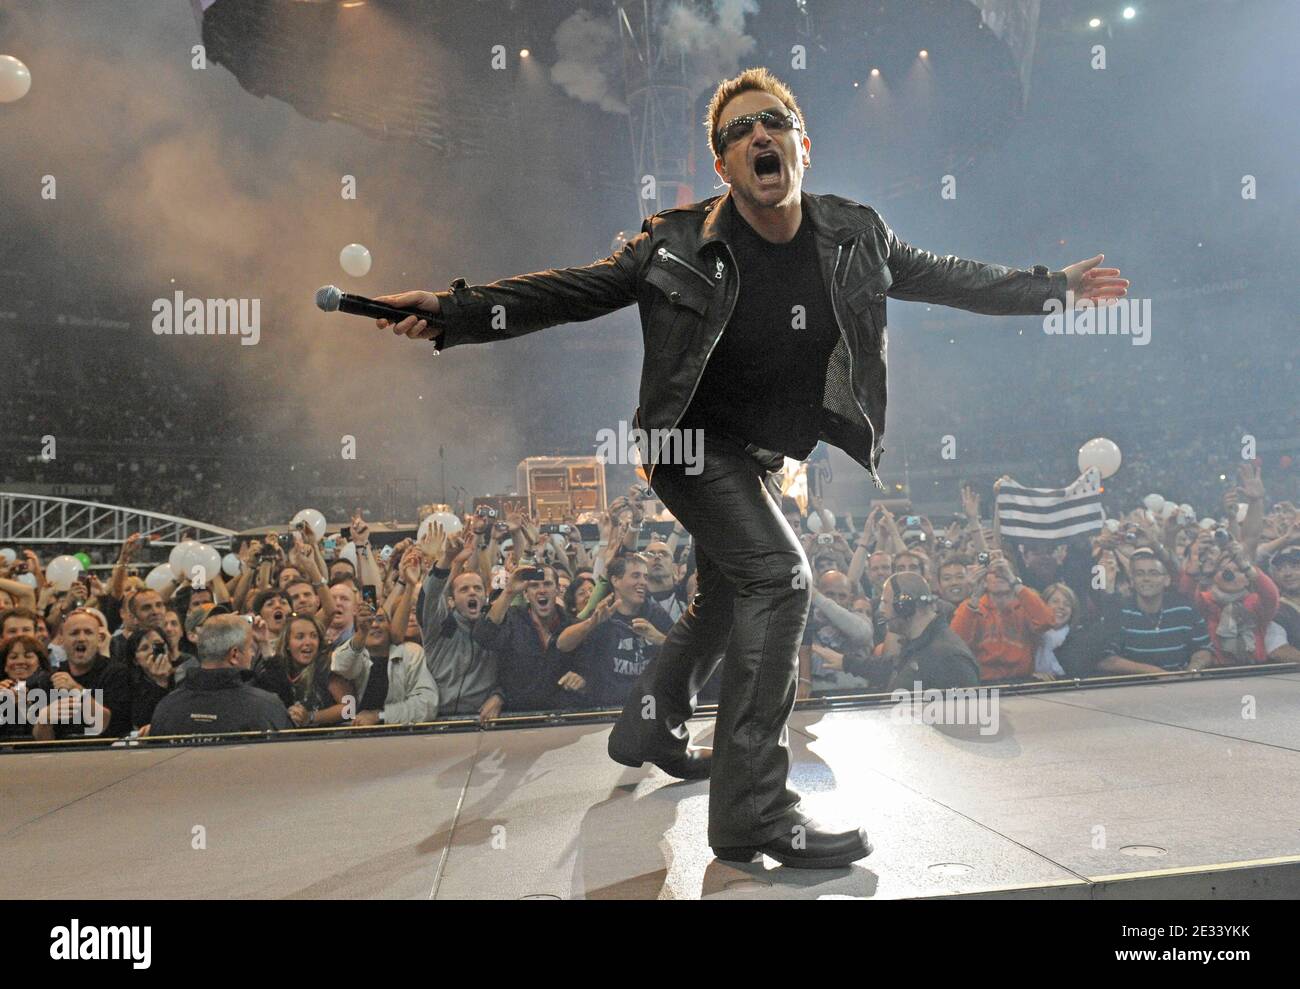 Bono (Paul Hewson) singer of the Irish rock band U2, performs on stage with guitarist The Edge (David Evans), bass player Adam Clayton and Larry Mullen Junior on drums at the Stade de France, in Saint-Denis, near Paris, France, on September 18, 2010. The band is on tour in Europe with their '360 Degrees'-tour. Photo by Christophe Guibbaud/ABACAPRESS.COM Stock Photo